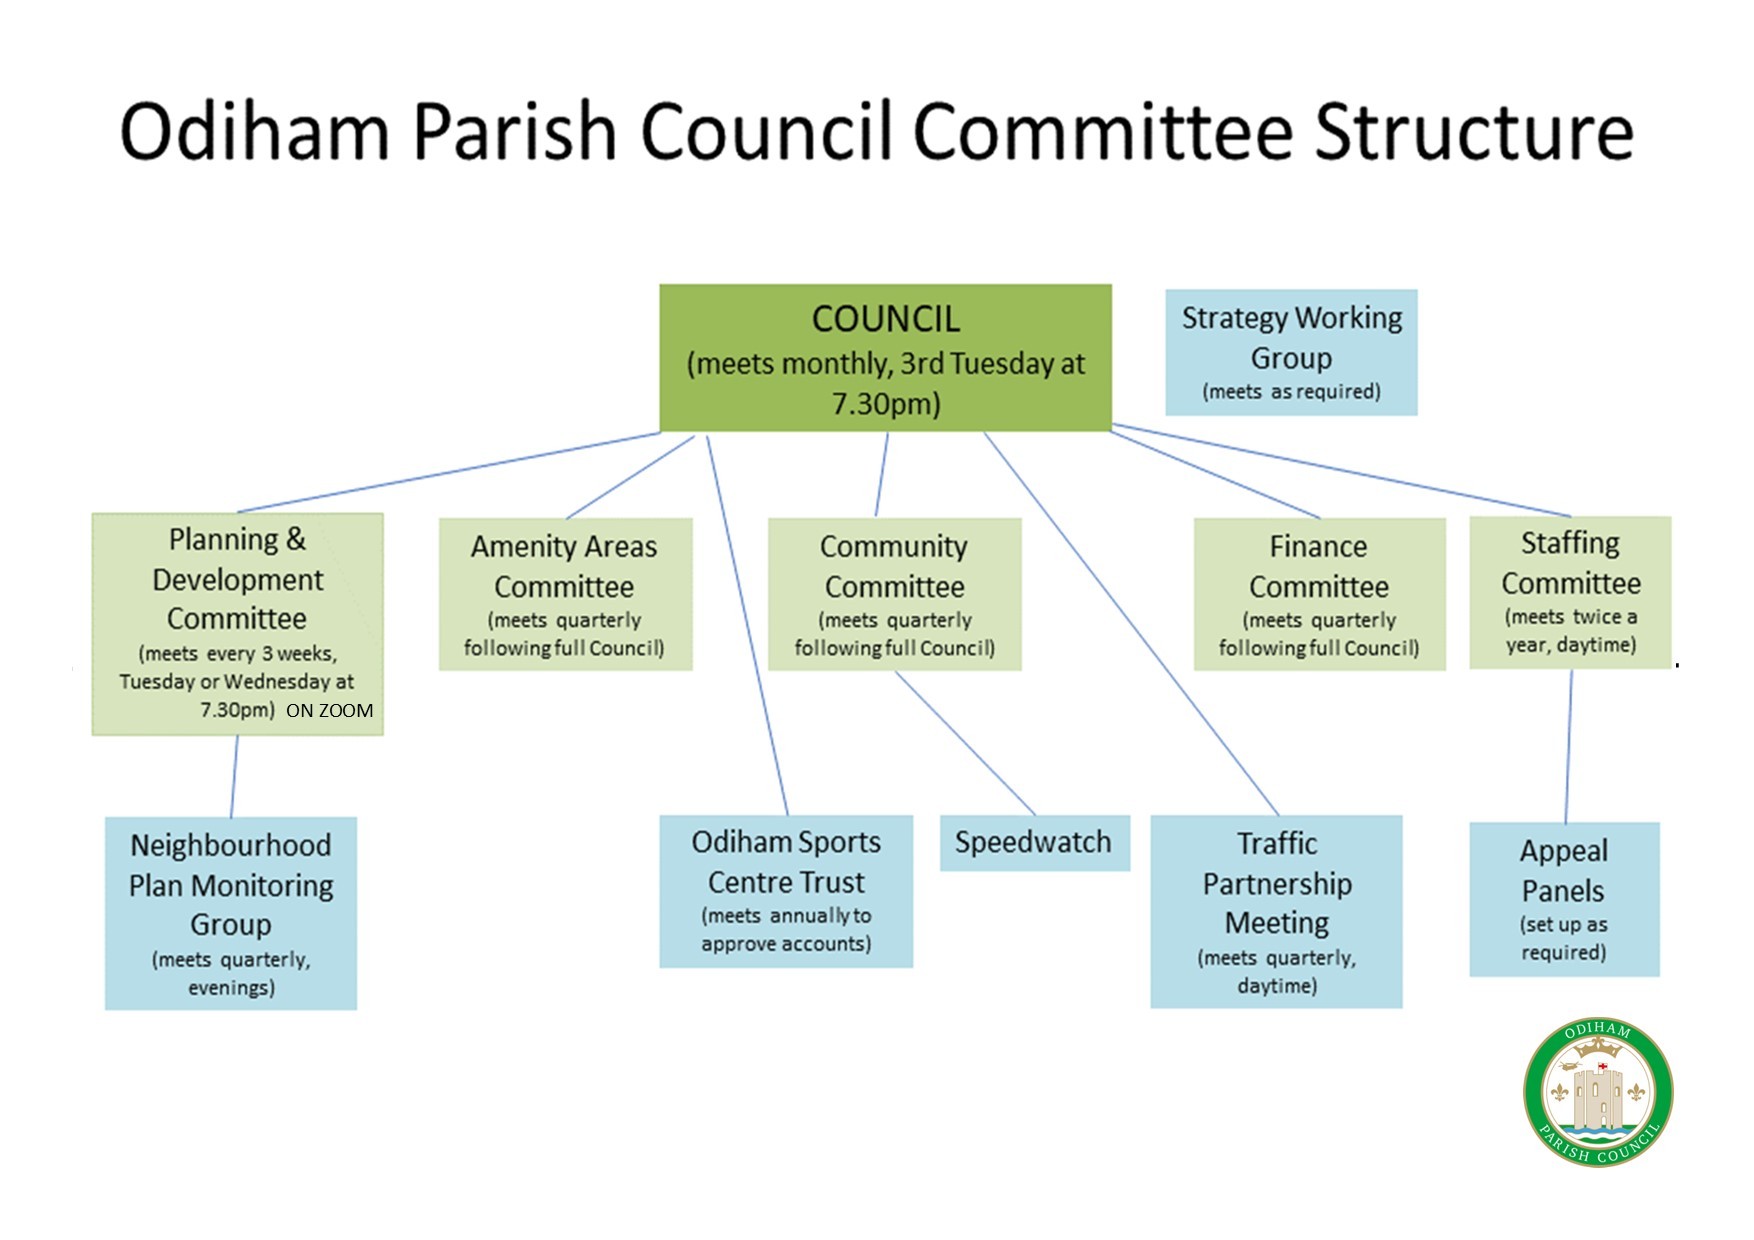 Organisation Chart revised 13 04 23 committees only